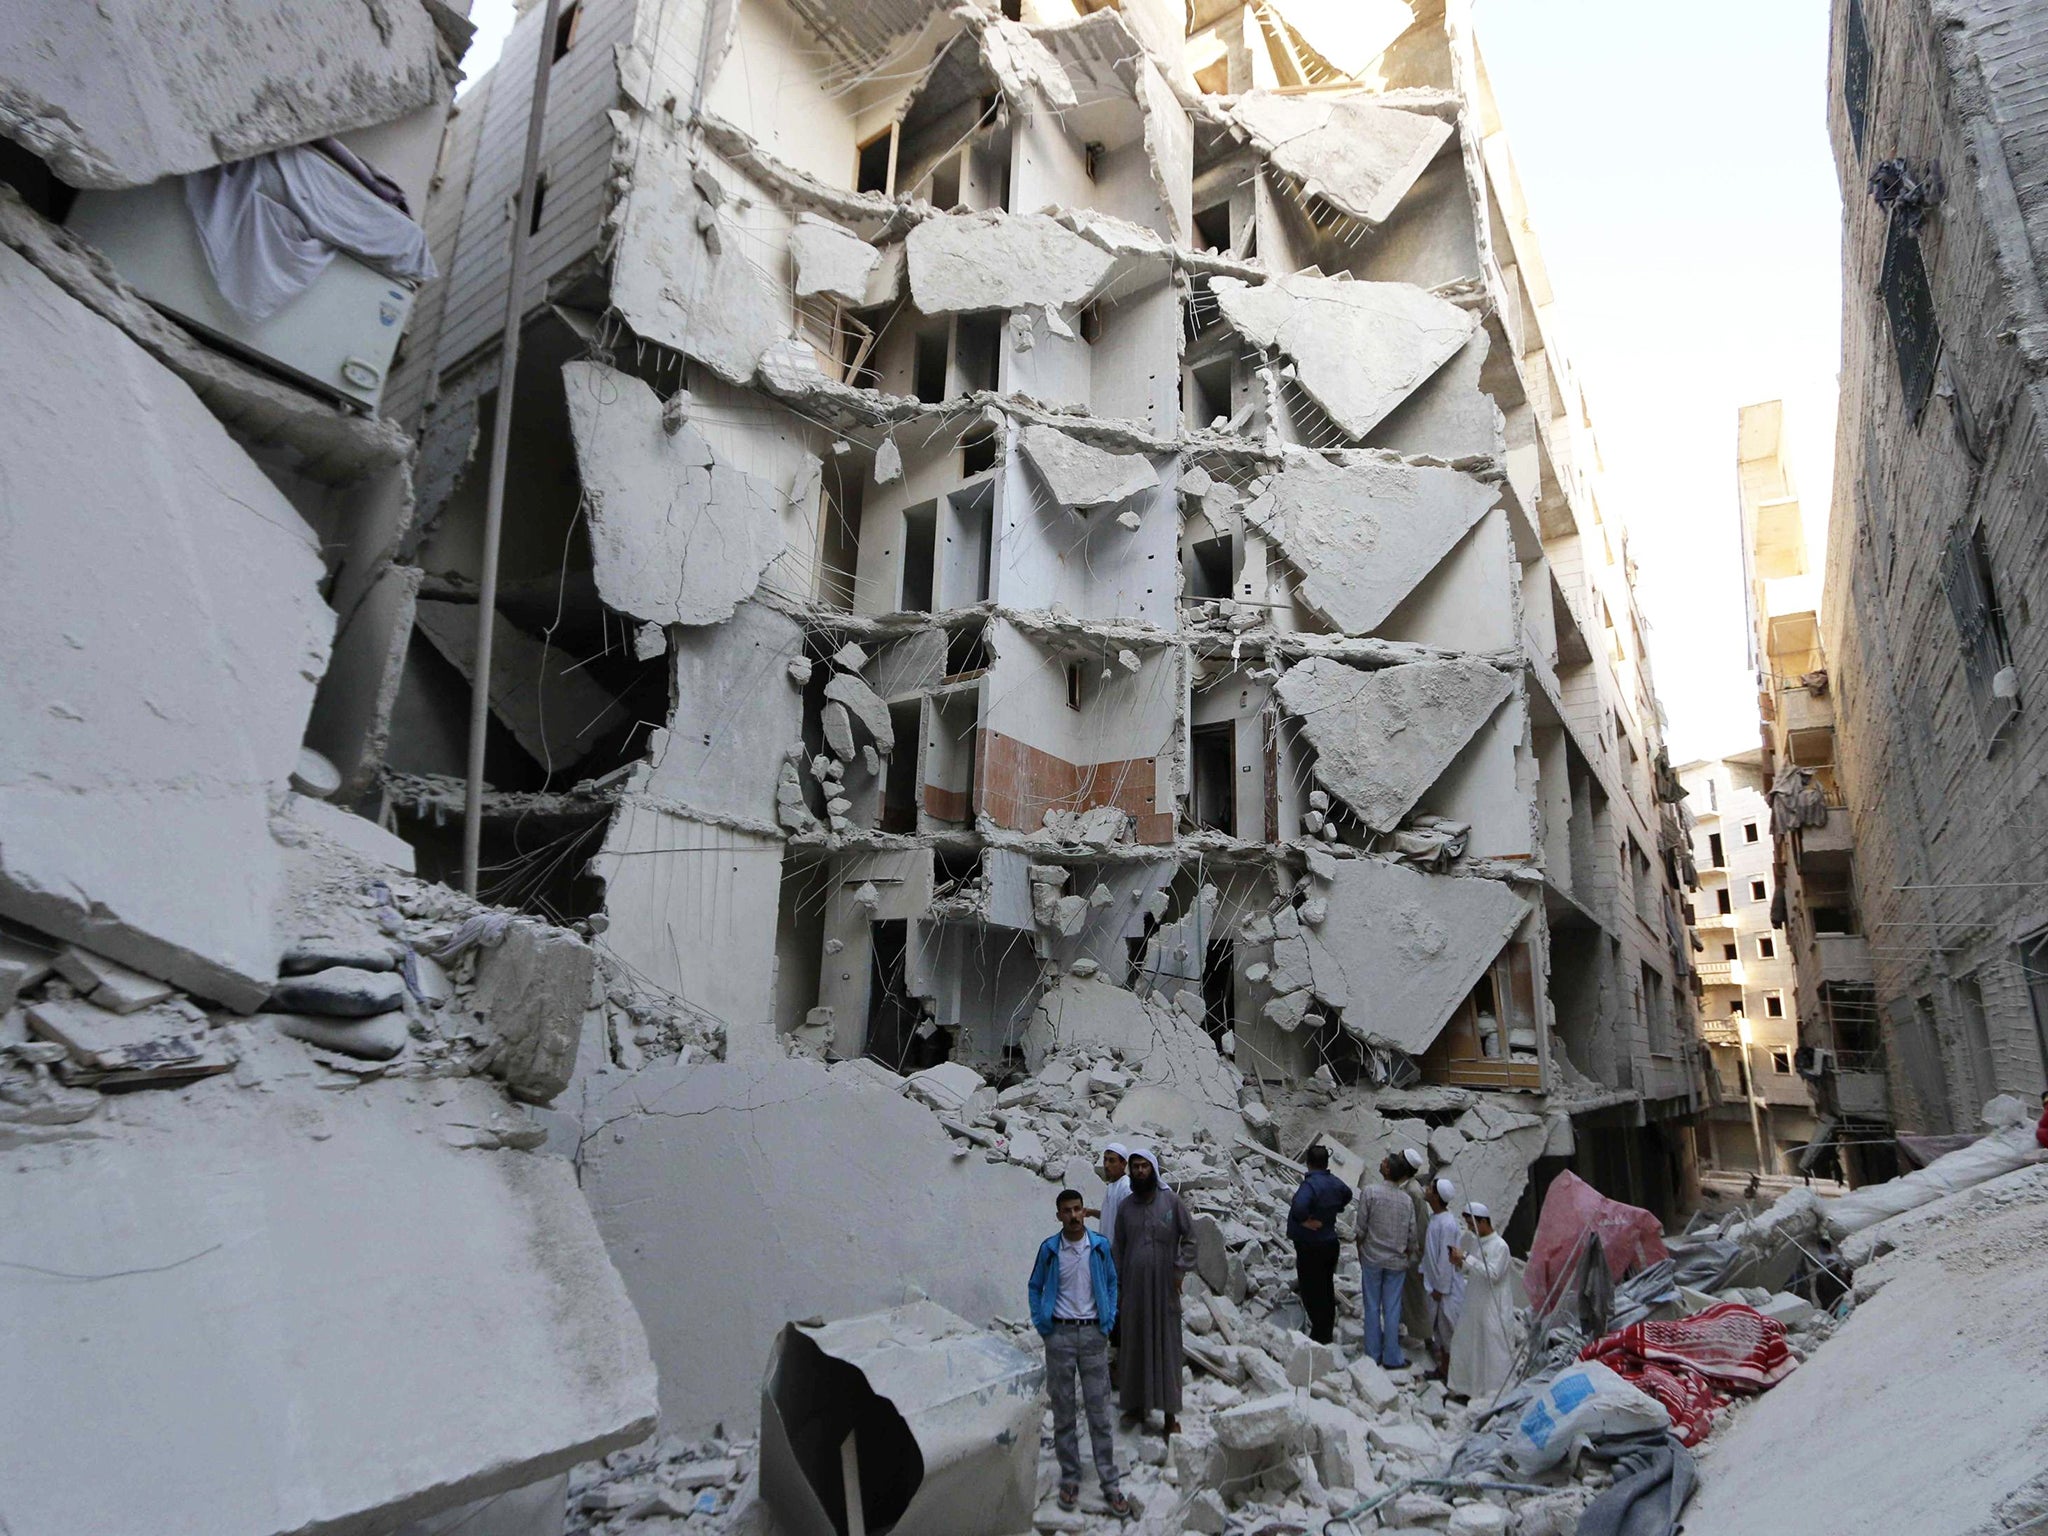 People stand on the rubble of collapsed buildings at a site hit by what activists said was a barrel bomb dropped by forces loyal to Syria's President Bashar al-Assad, in the Al-Fardous neighbourhood of Aleppo 